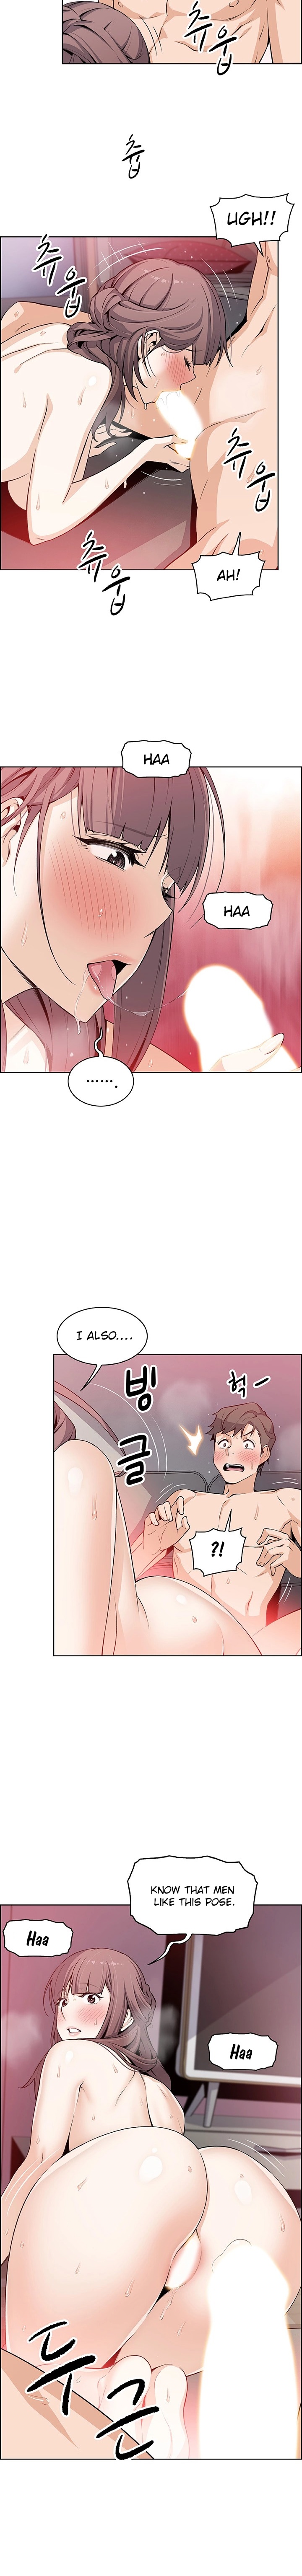 Housekeeper Manhwa - Chapter 26 Page 8